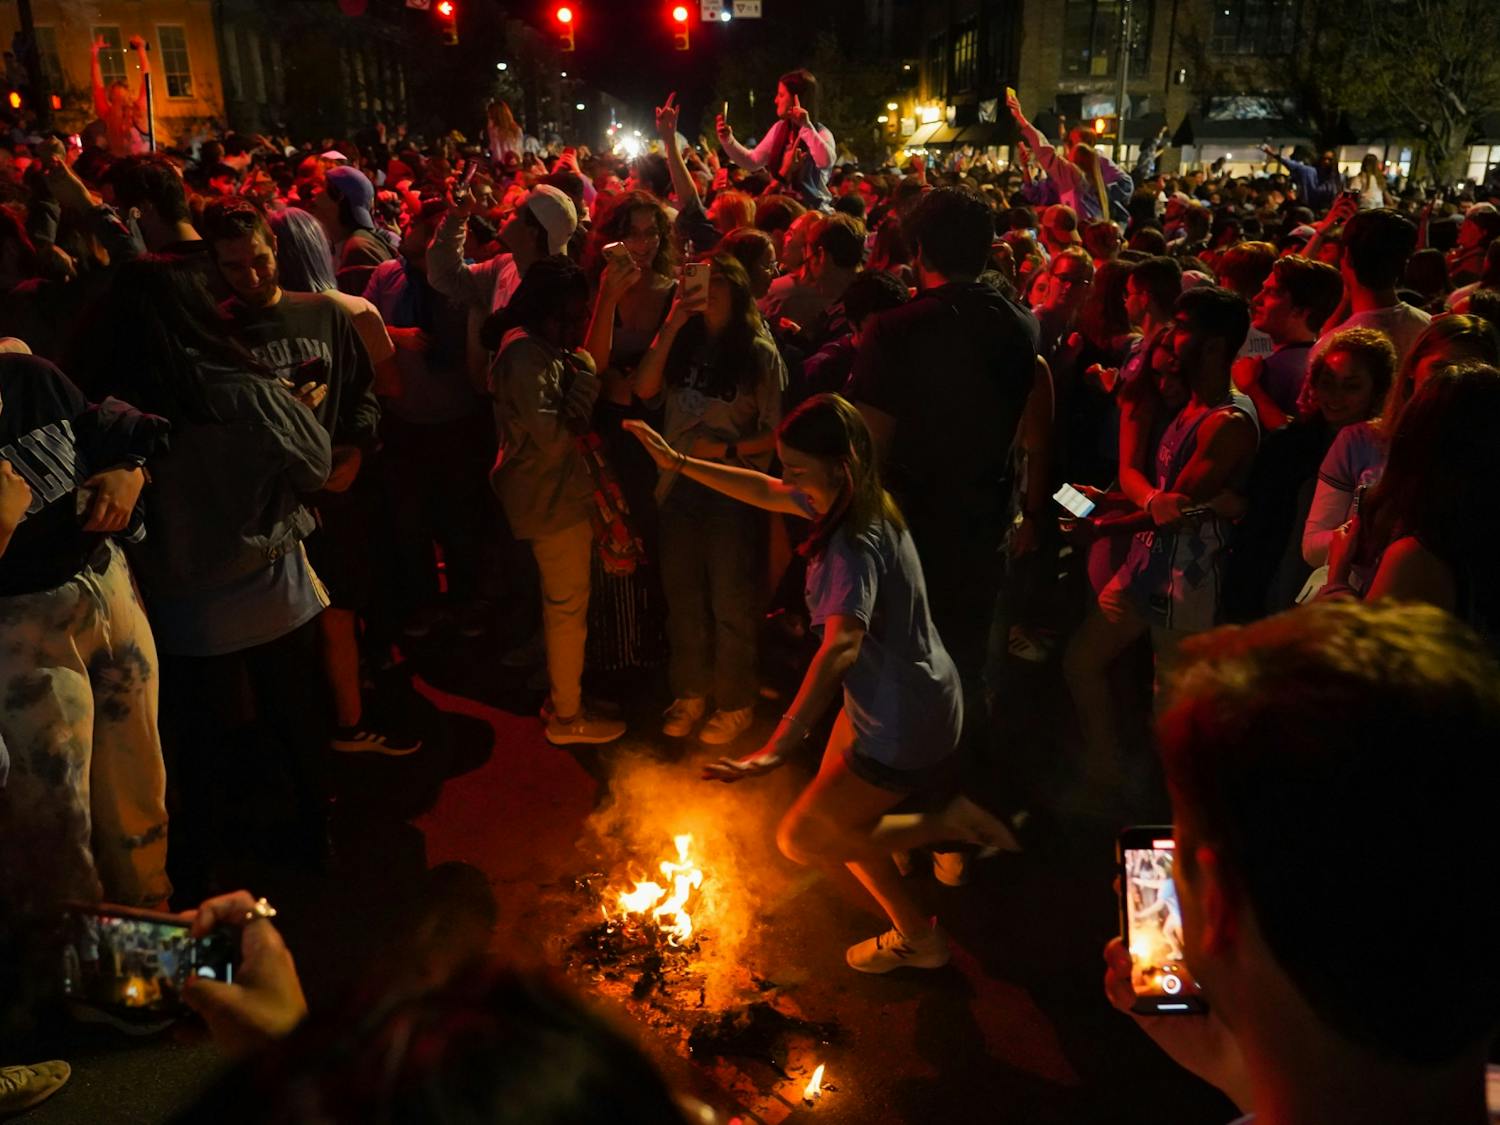 UNC fans jump over a small fire at the intersection of E Franklin and Columbia St. during celebrations after UNC's defeat of Duke in their FInal Four matchup on April 3, 2022. UNC beat Duke 81-77. Photo courtesy of Morgan Pirozzi 